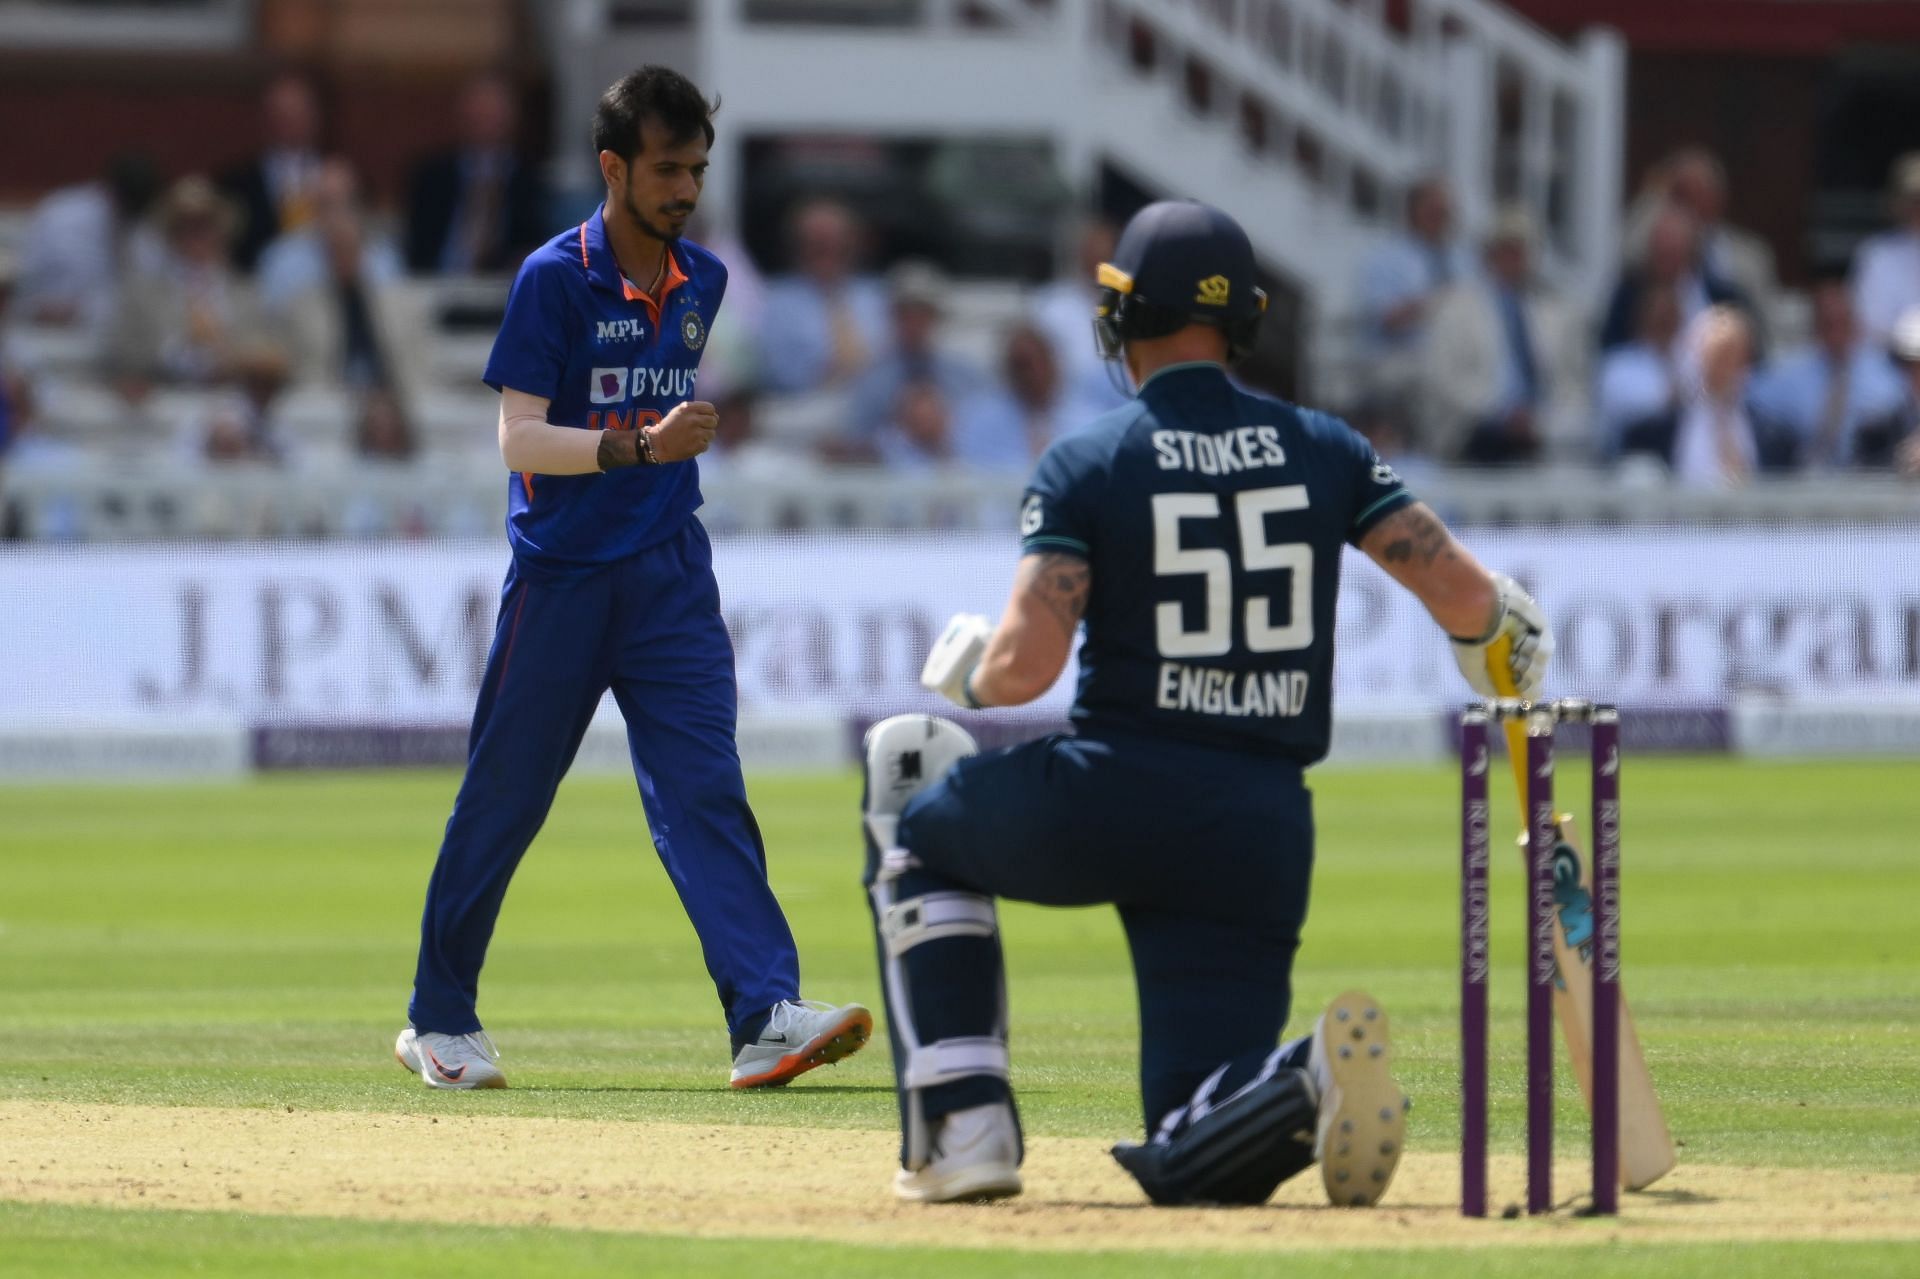 England v India - 2nd Royal London Series One Day International (Image Courtesy: Getty Images)